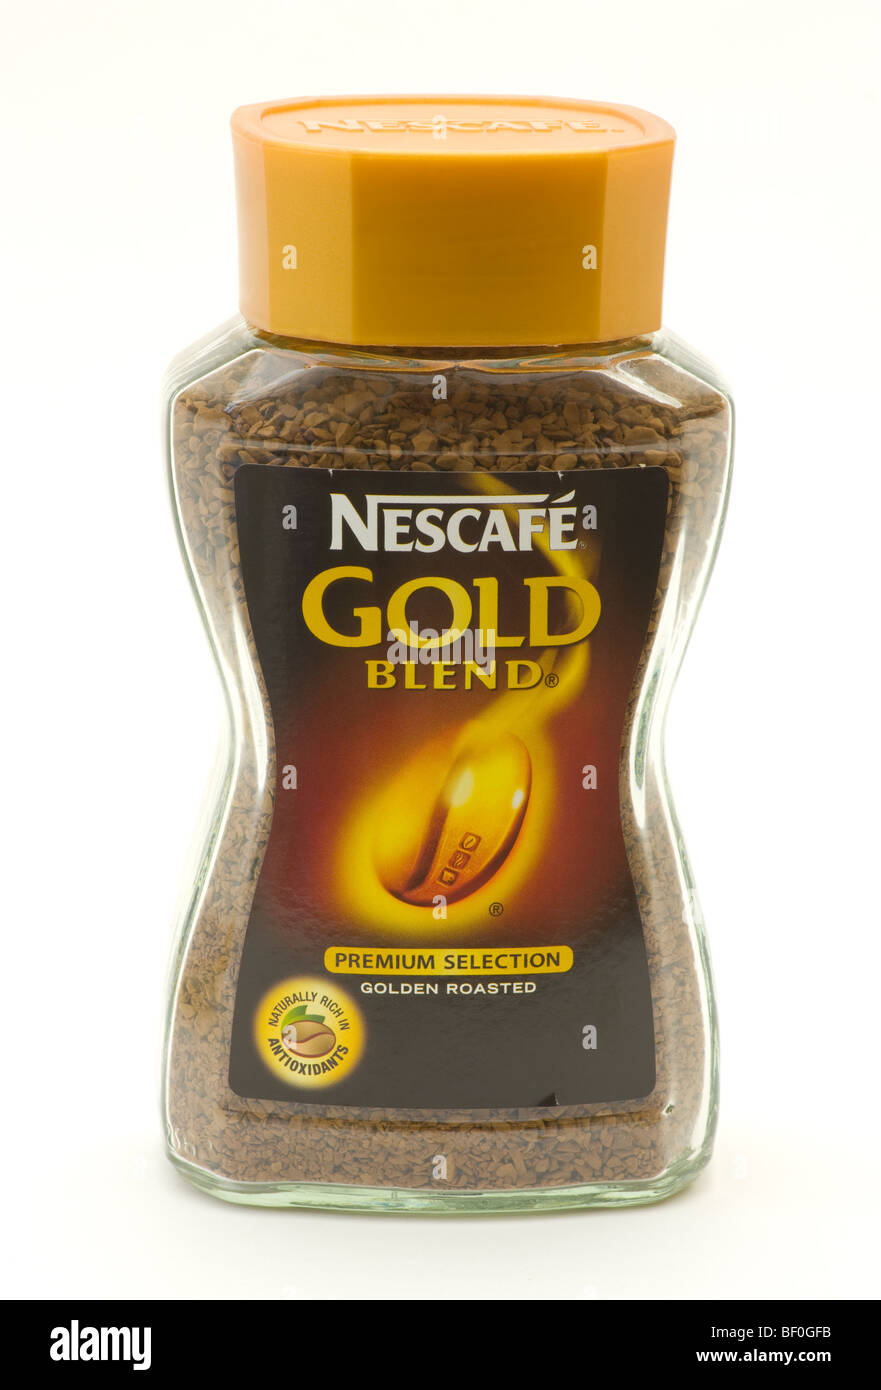 A Glass Jar Of Nescafe Gold Blend Coffee Against a White Background Stock  Photo - Alamy